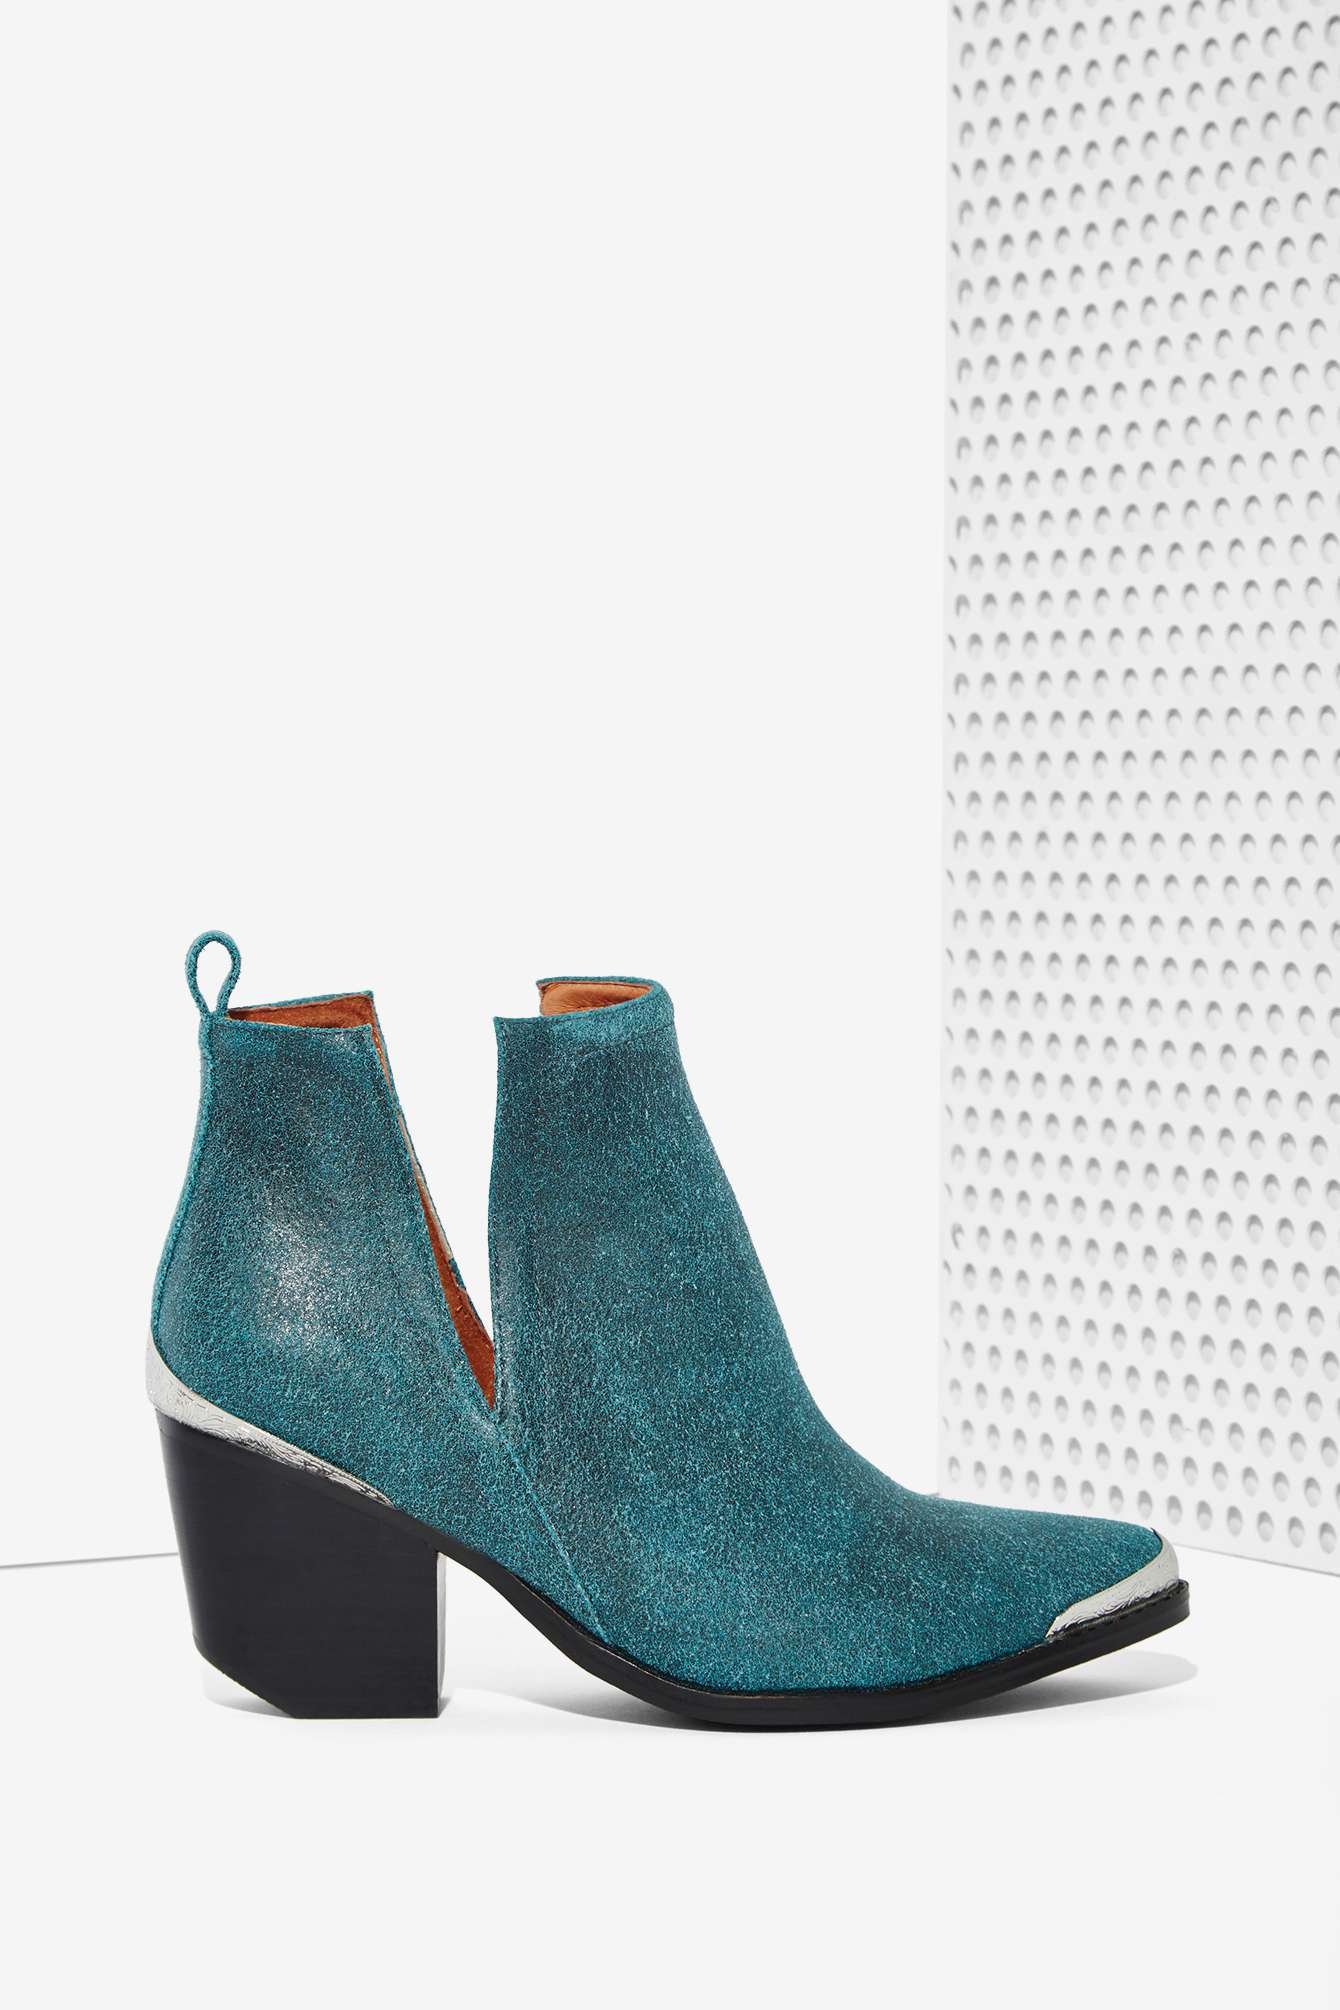 Jeffrey Campbell Cromwell Suede Bootie - Teal in Blue - Lyst